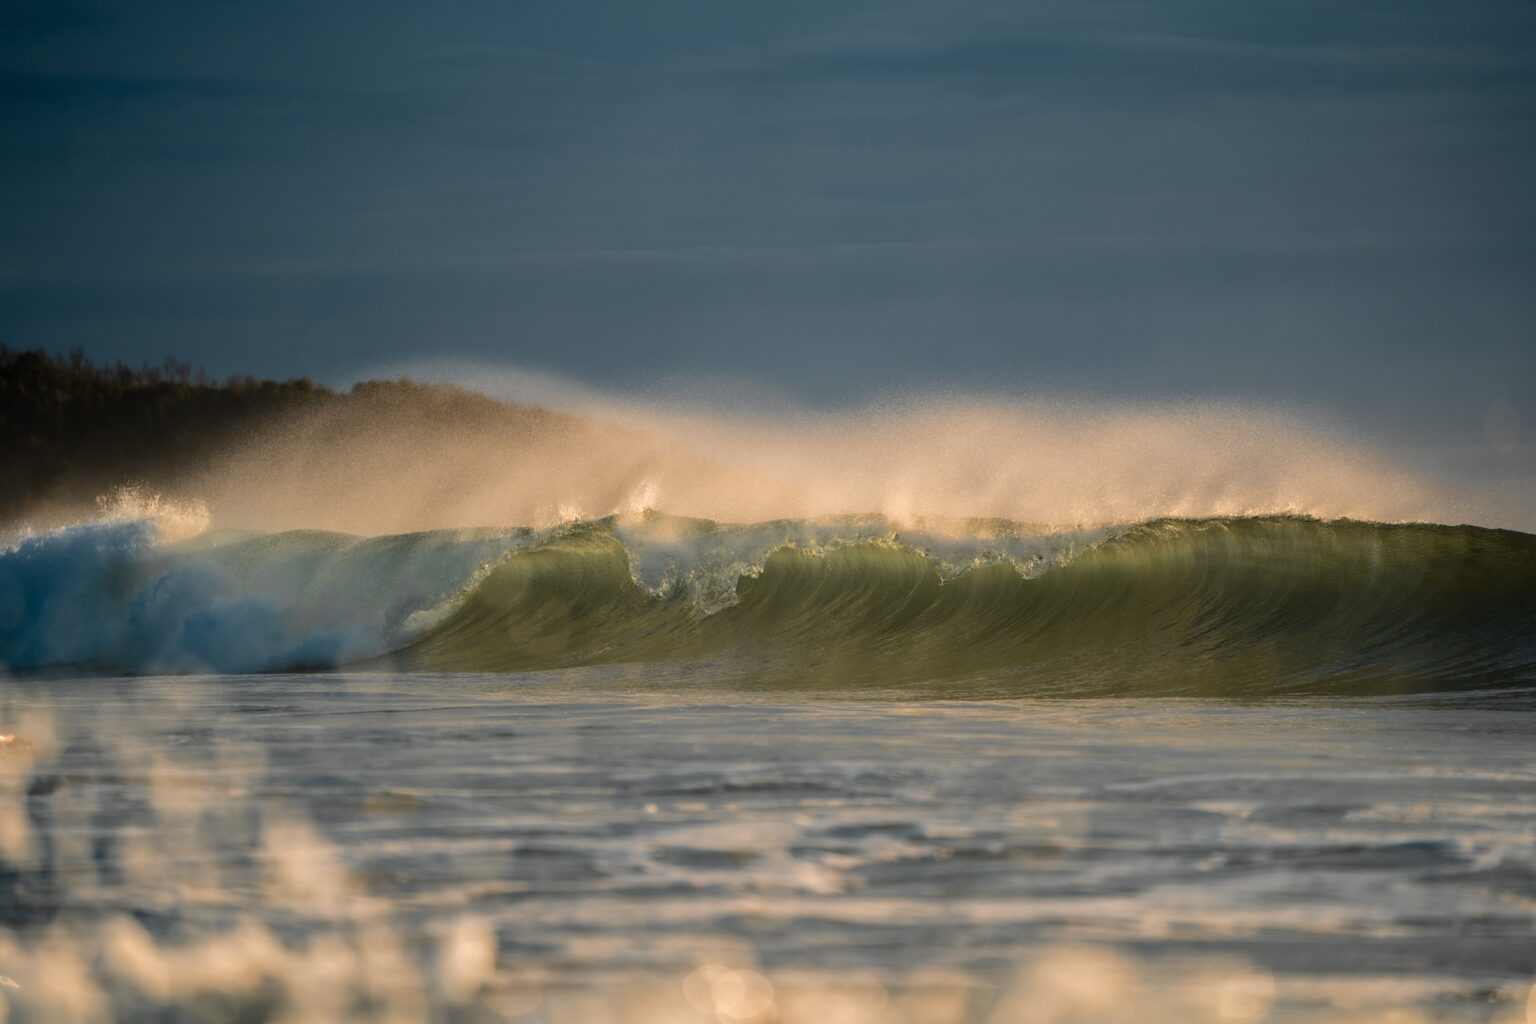 Good Surf Opportunities Unfold At All Stages Of The Tide